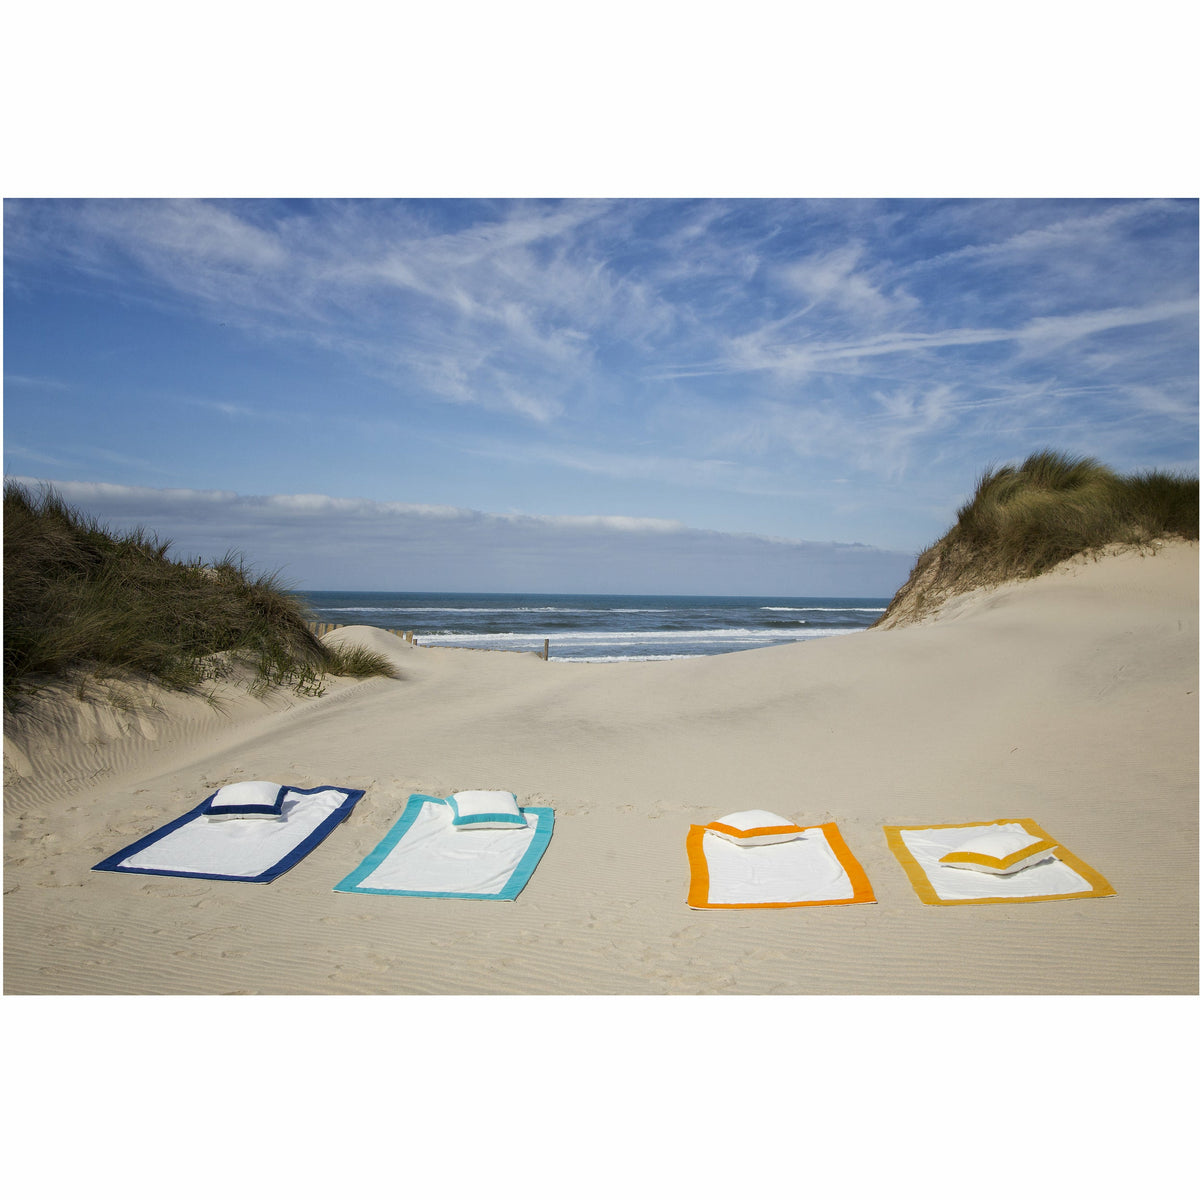 Abyss Portofino Beach Towels and Pillows On Sand Fine Linens